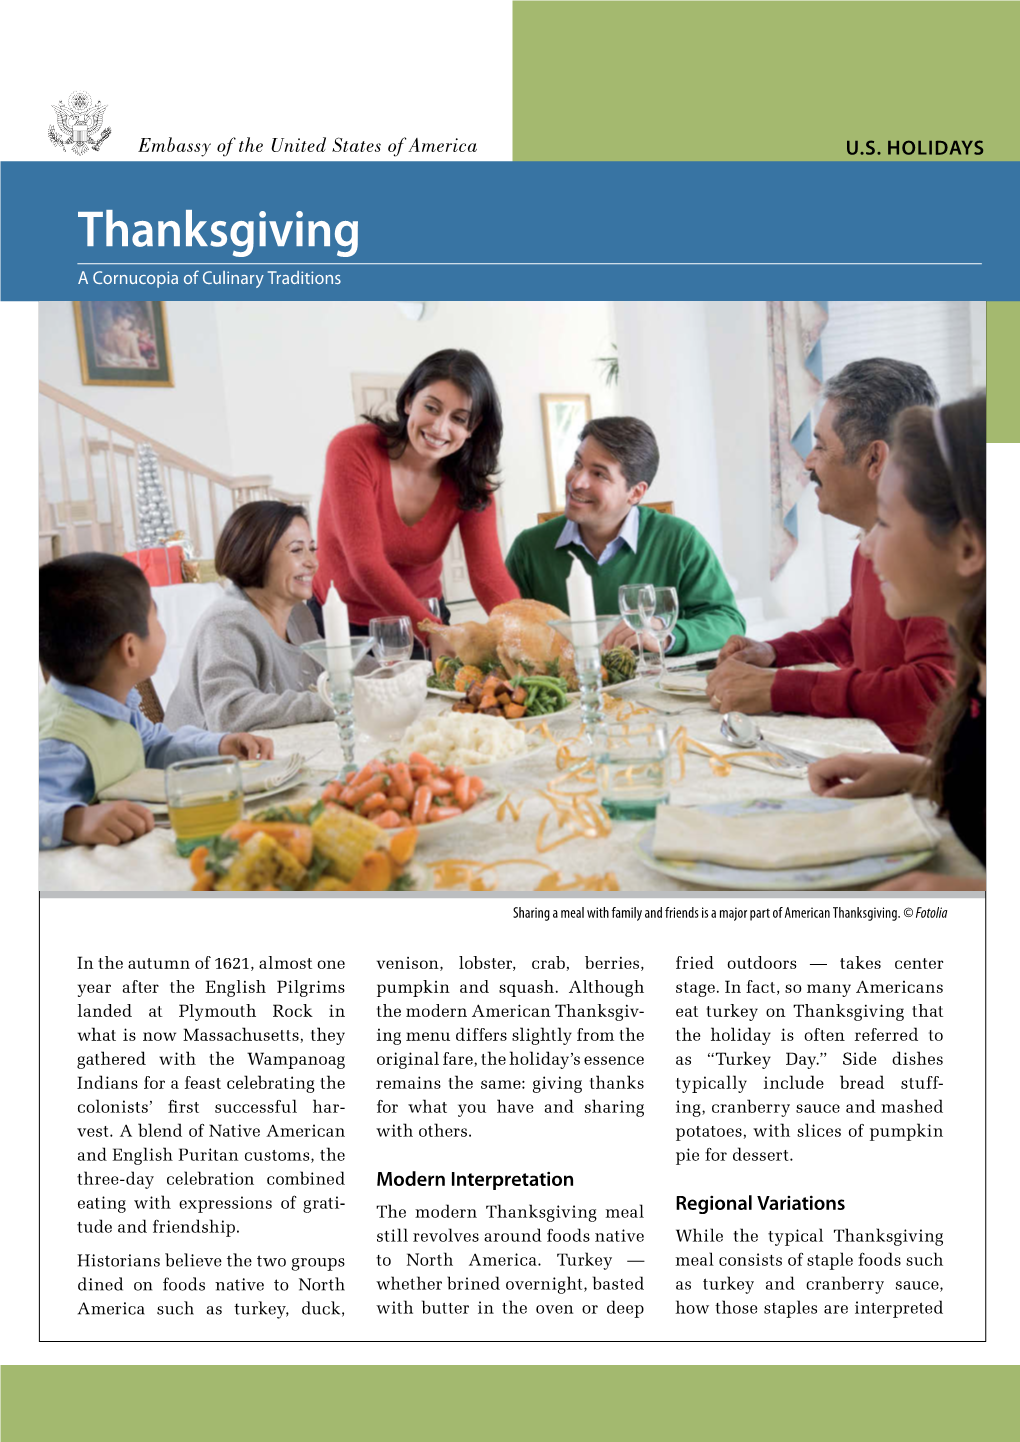 U.S. Holidays Series: Thanksgiving: a Cornucopia of Culinary Traditions